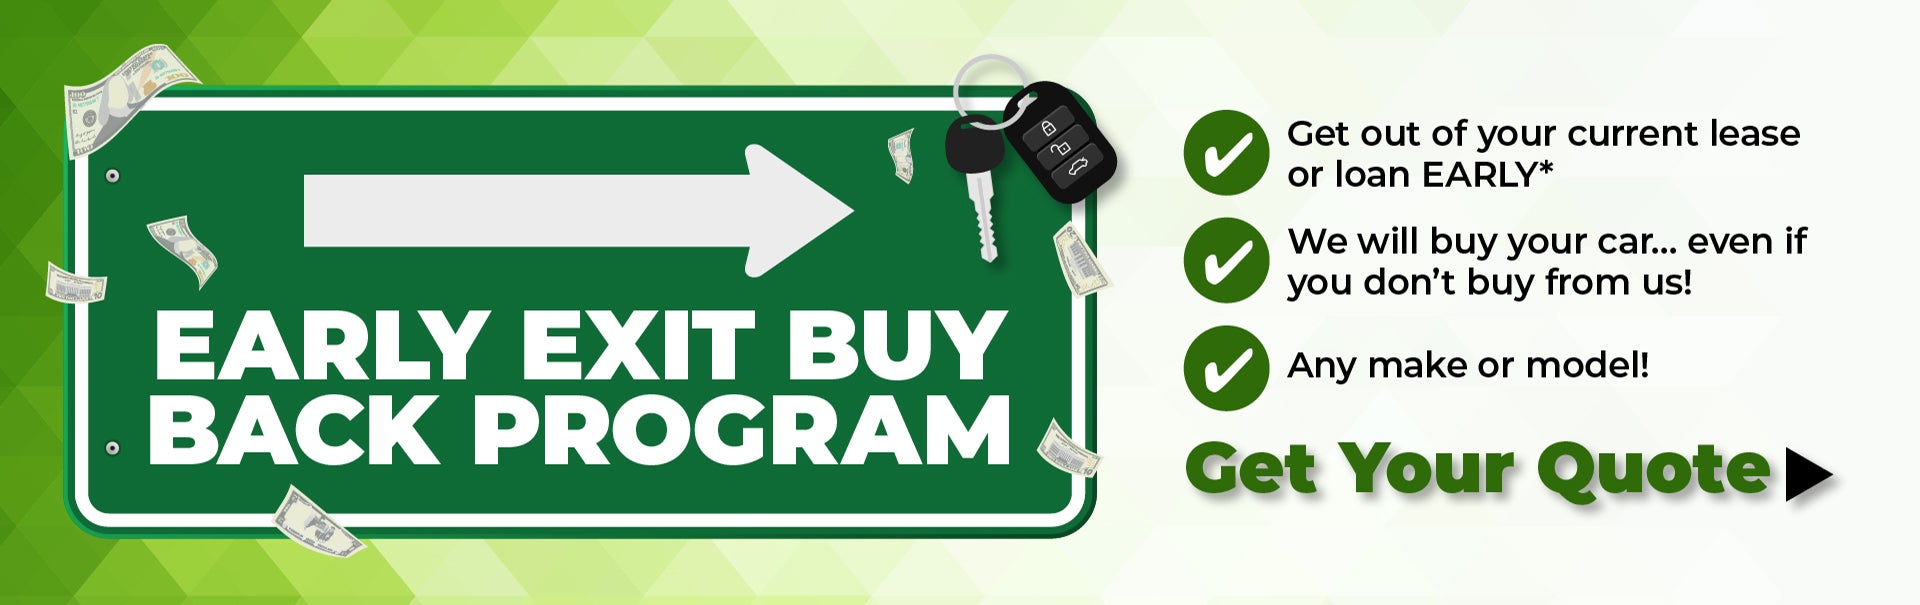 Early Exit Buy Back Program - Get Your Quote